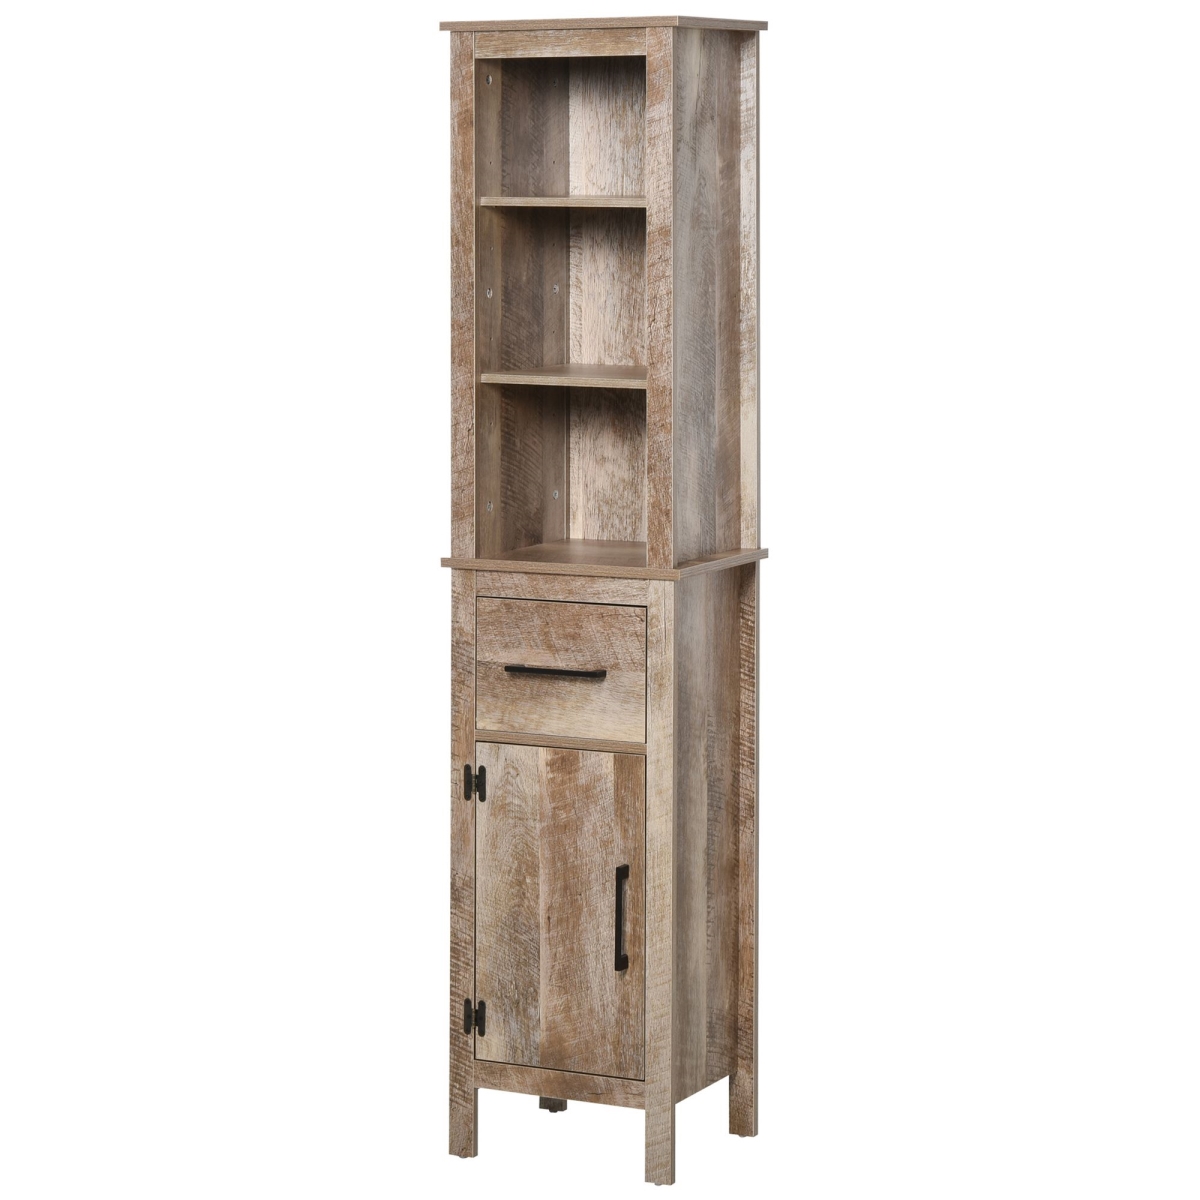 Picture of 212 Main 834-294 Kleankin Narrow Bathroom Cabinet Bathroom Tall Free Standing Tower Cabinet with Adjustable Shelves & Cupboard Space Saving Organizer Home Storage